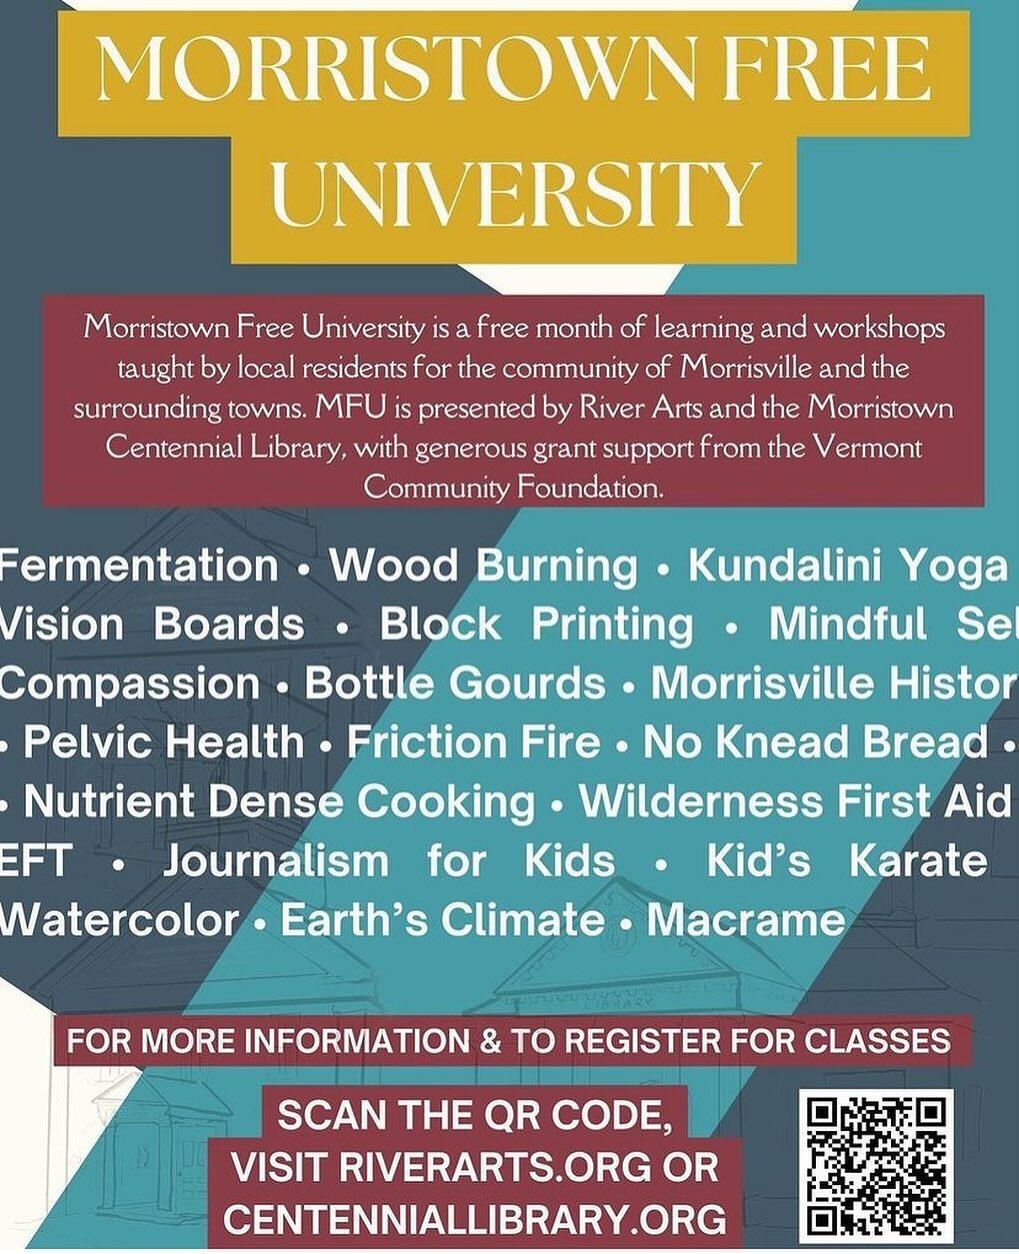 ✨REGISTRATION IS OPEN! ✨
Morristown Free University is a free month of learning and workshops taught by local residents for the community of Morrisville and the surrounding towns. MFU is presented by River Arts and the Morristown Centennial Library, 